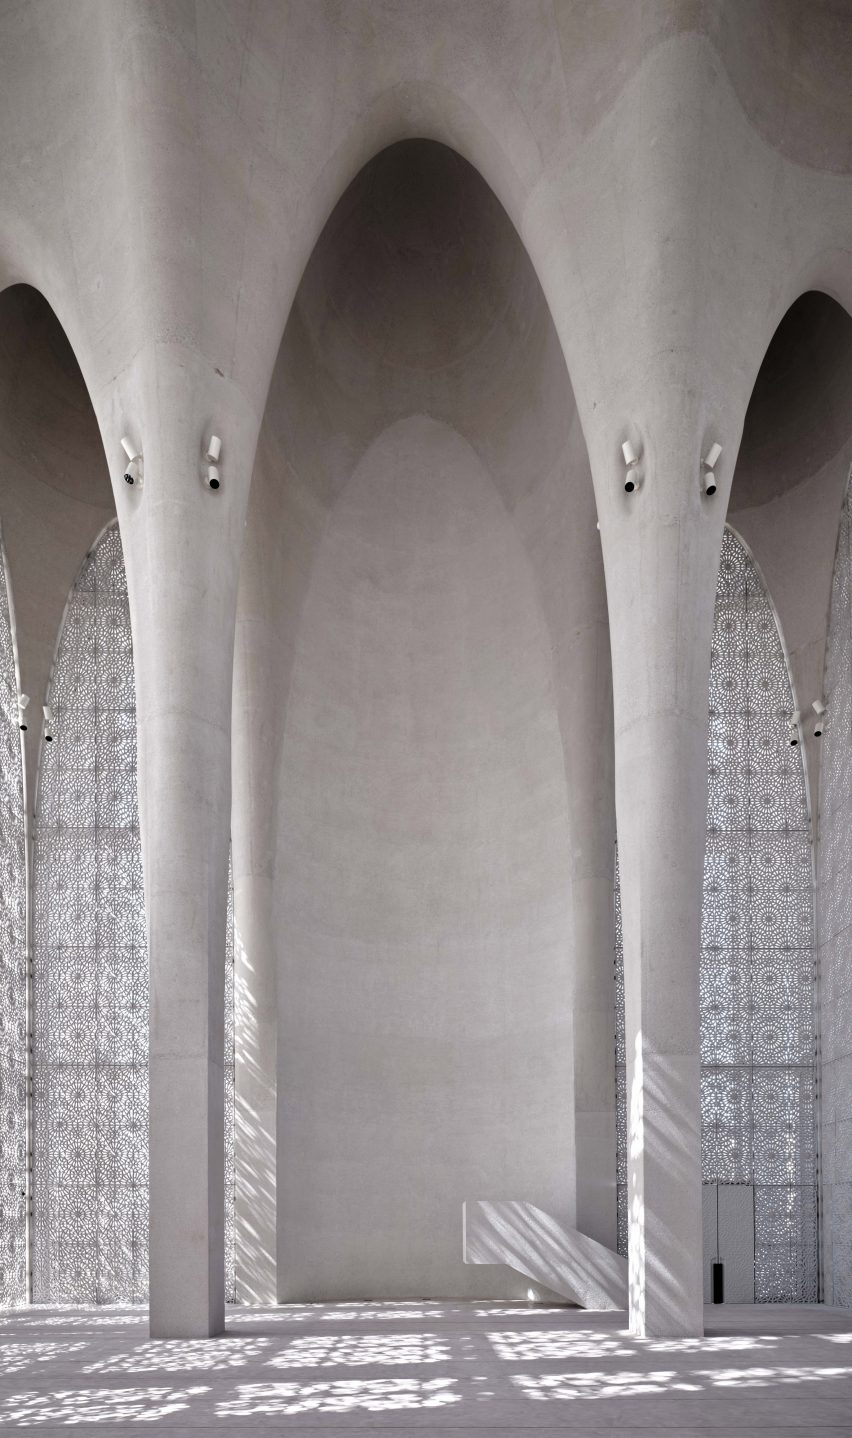 Arches inside the Abu Dhabi Mosque